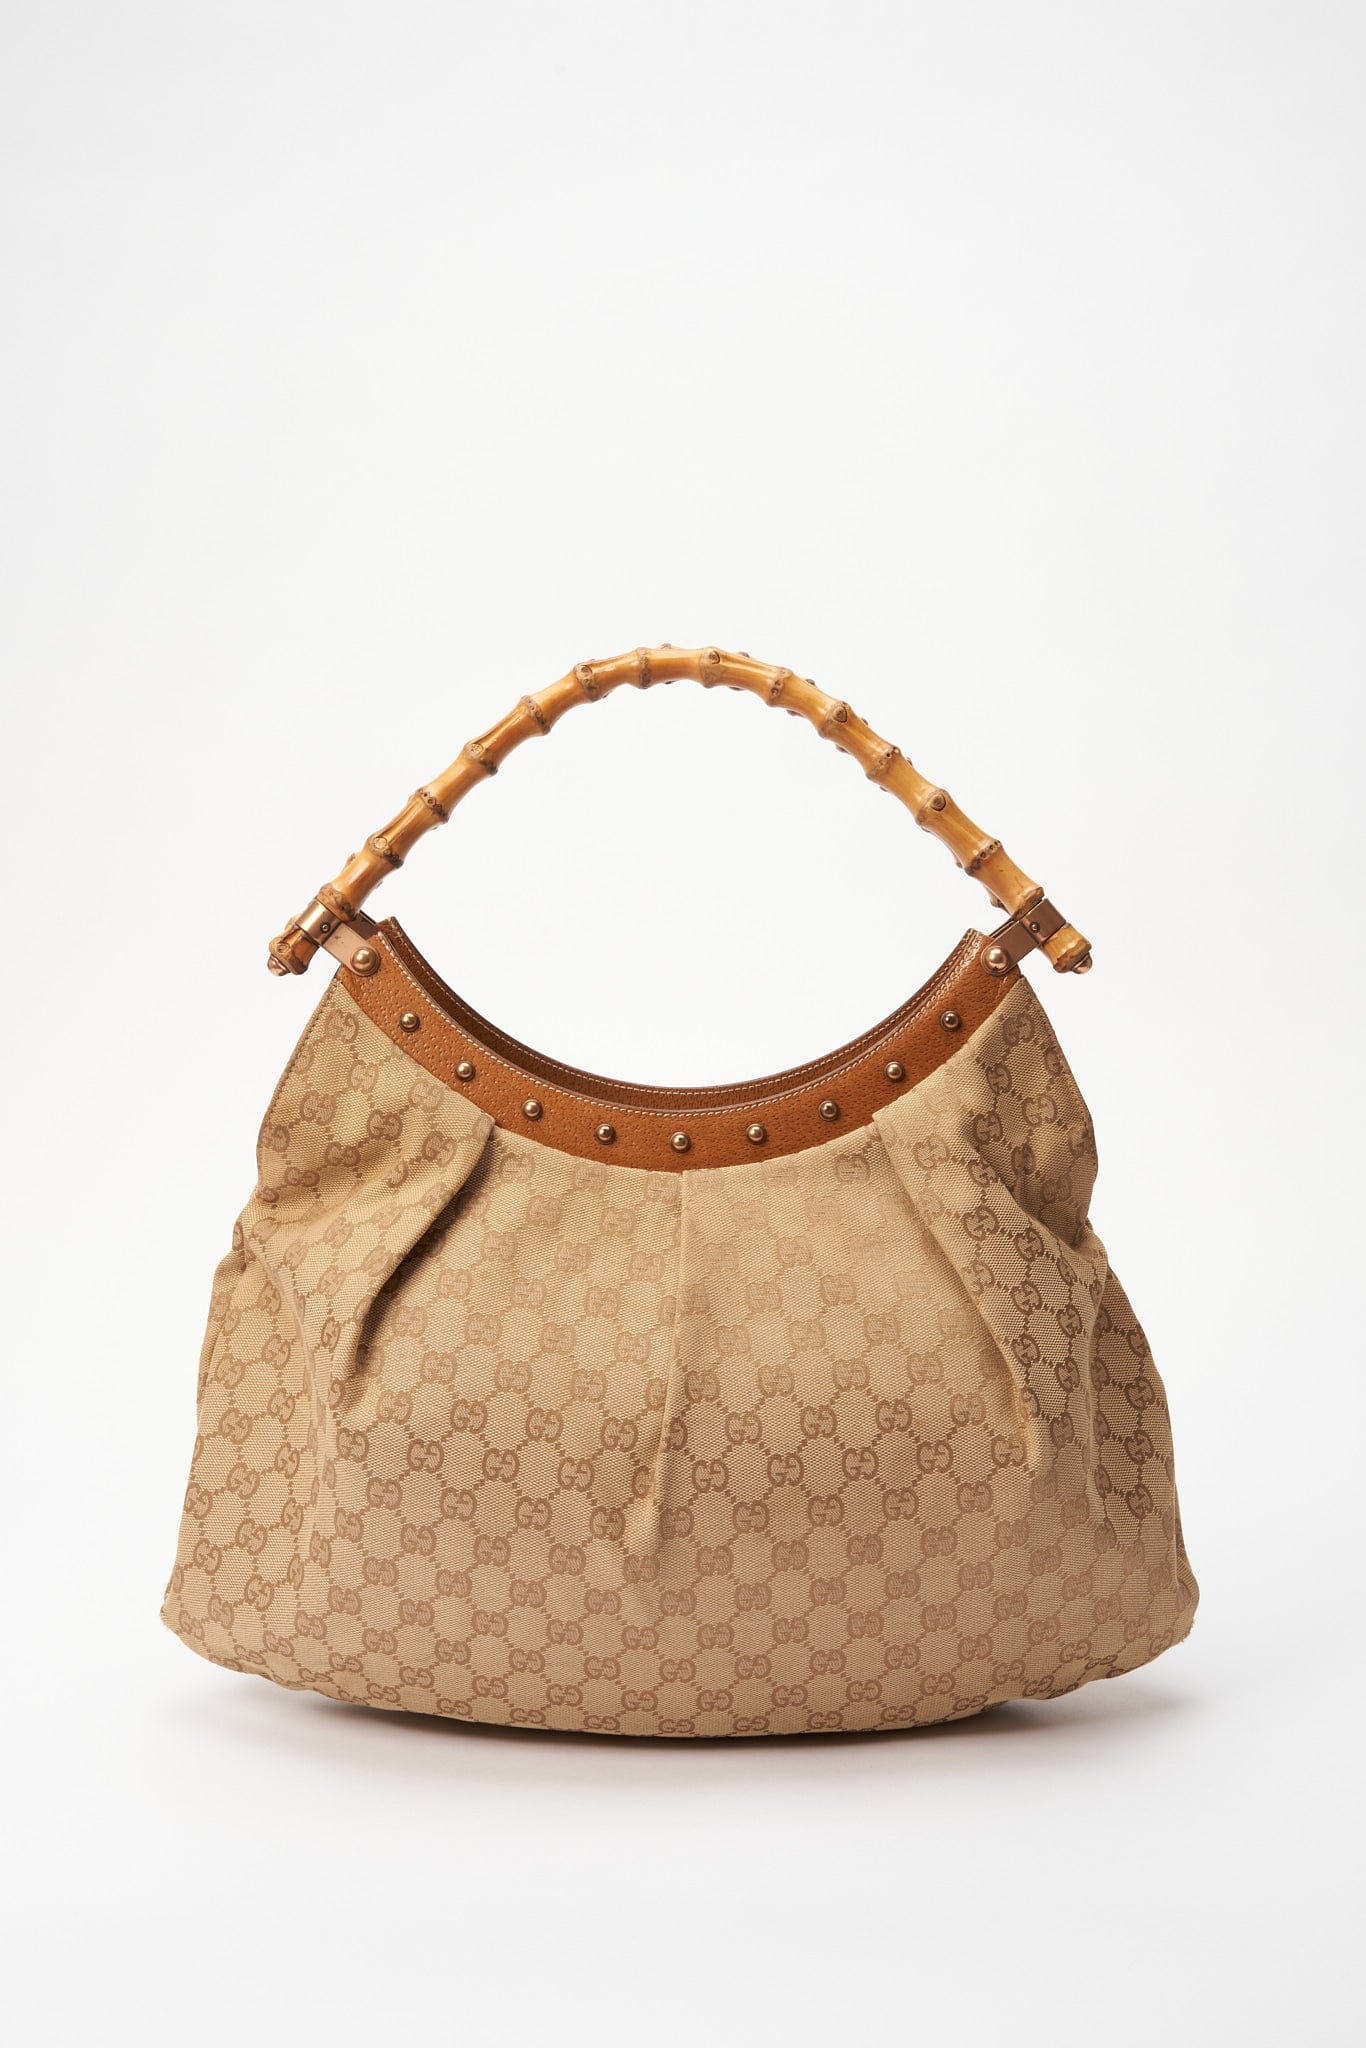 Where to buy the Gucci Bamboo bag